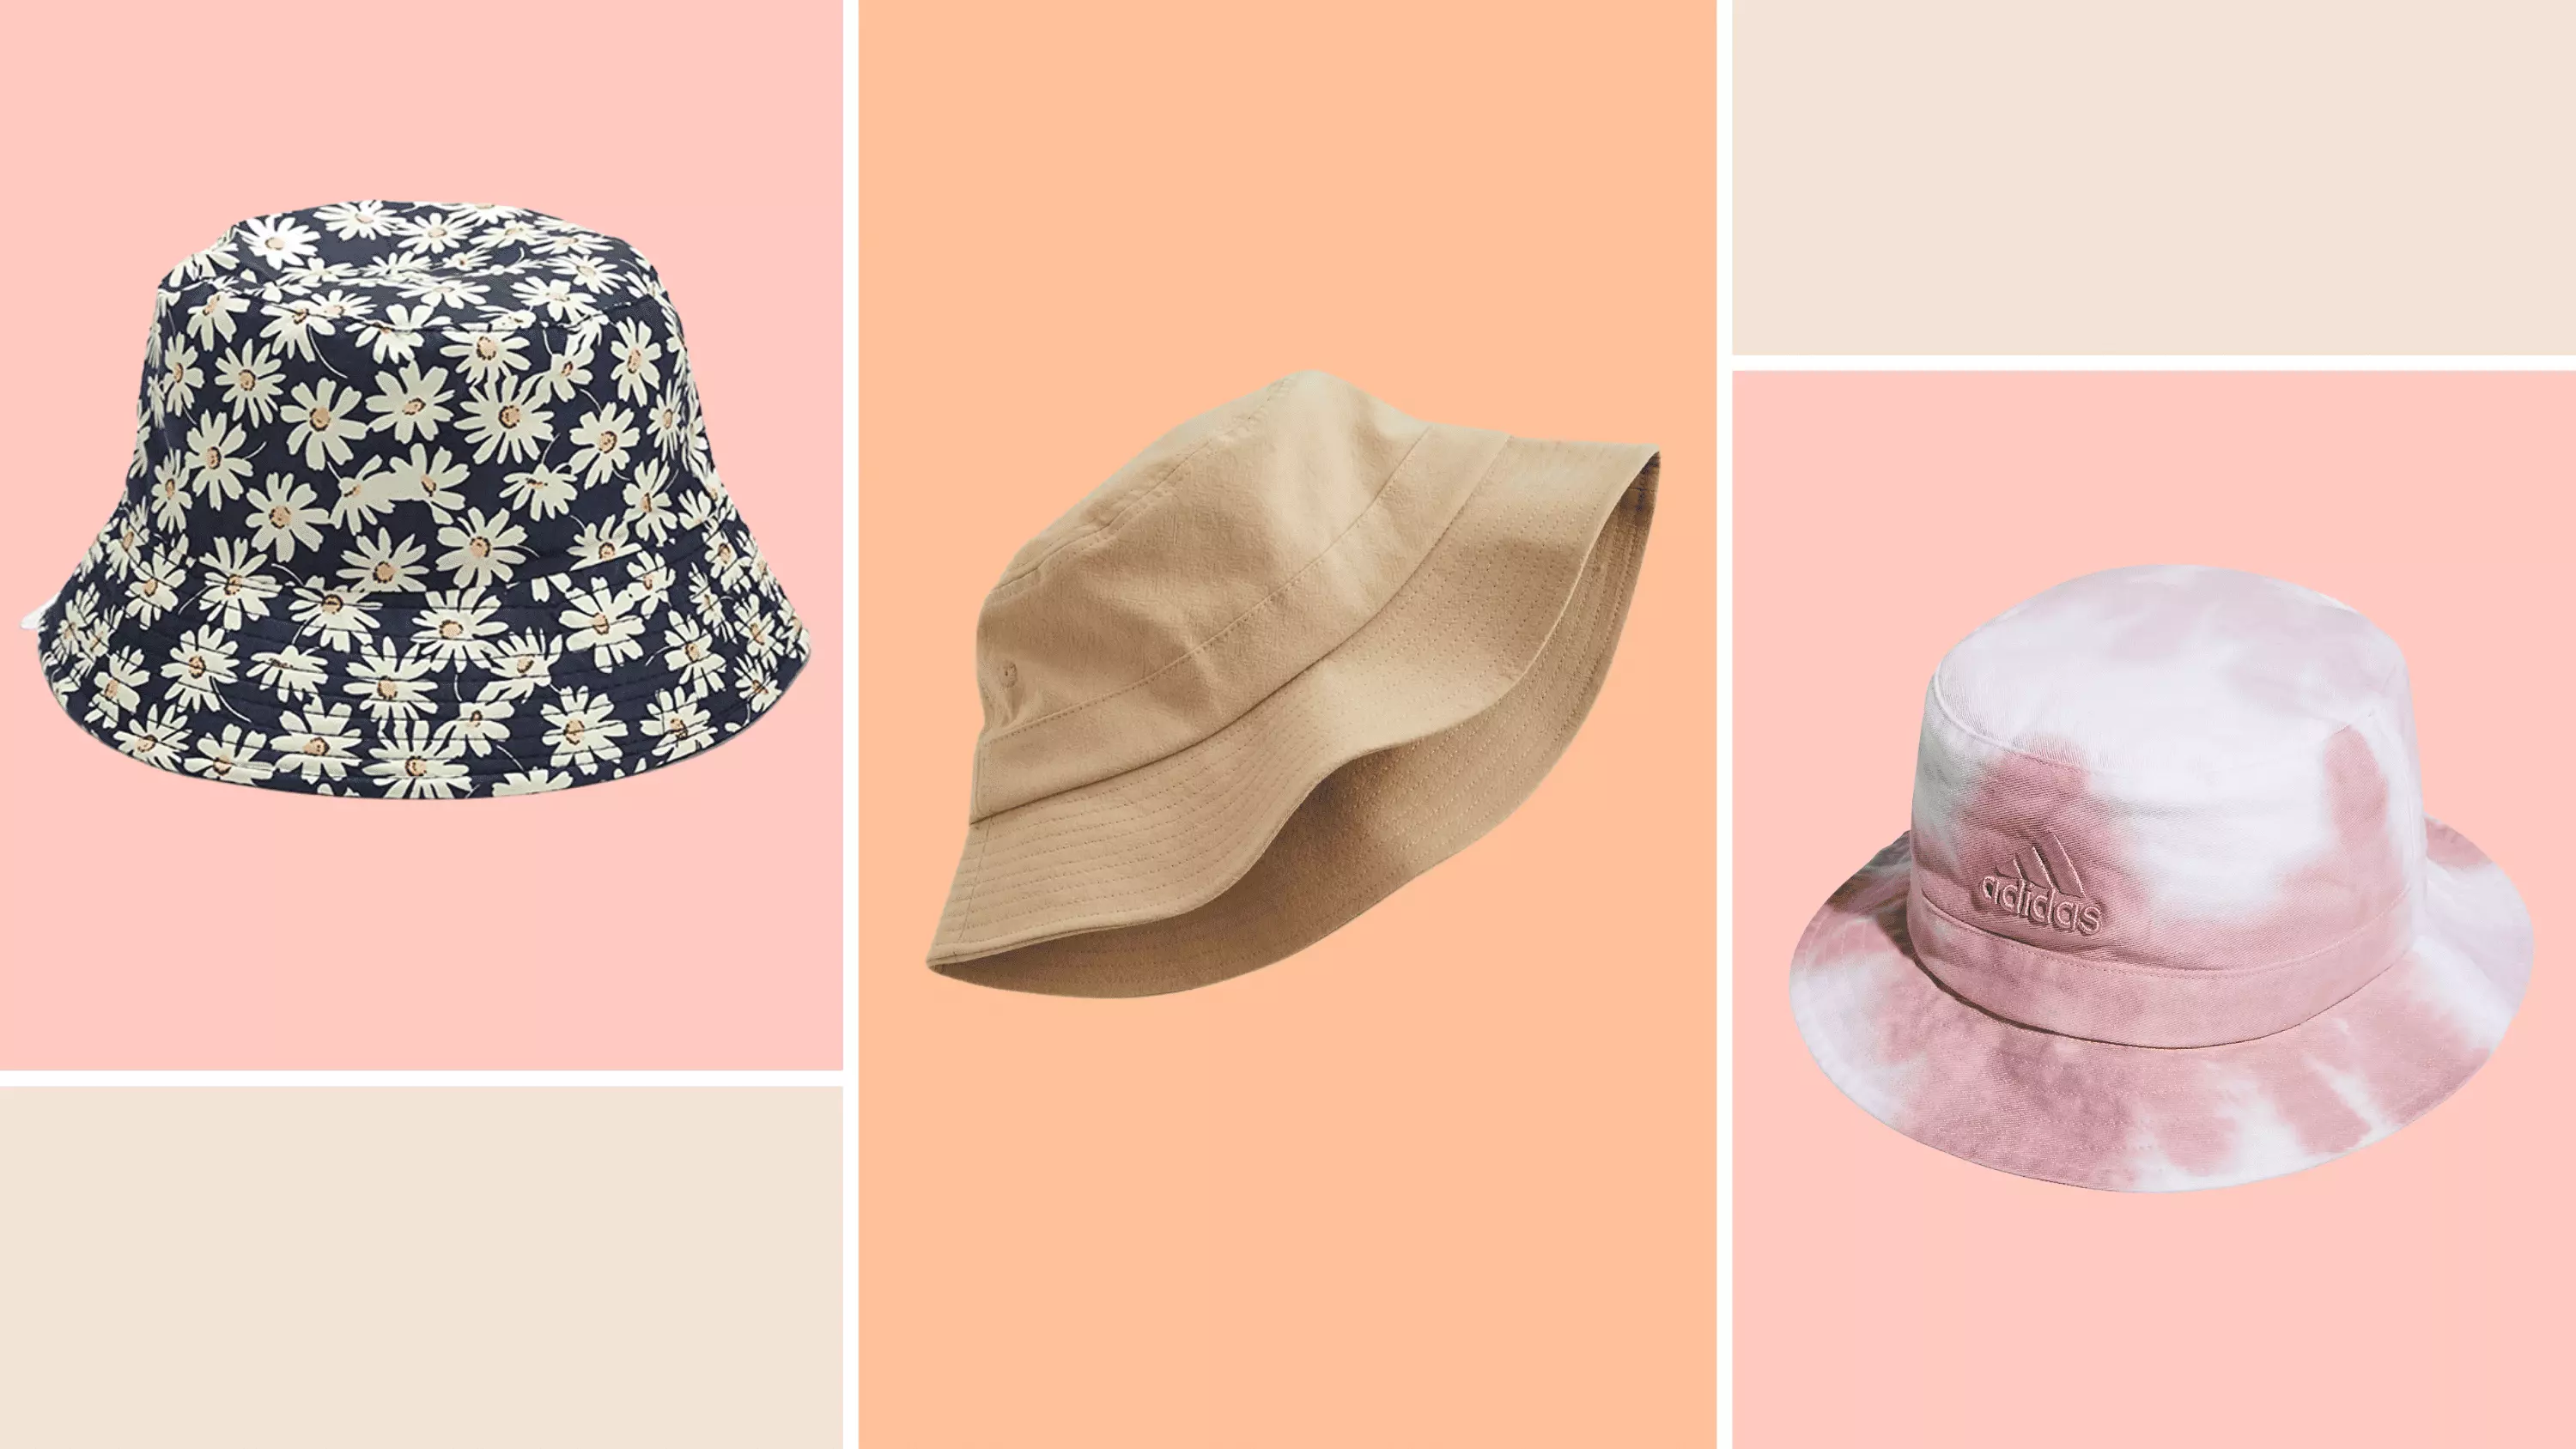 Say goodbye to bad hair days with these fun, patterned hats.